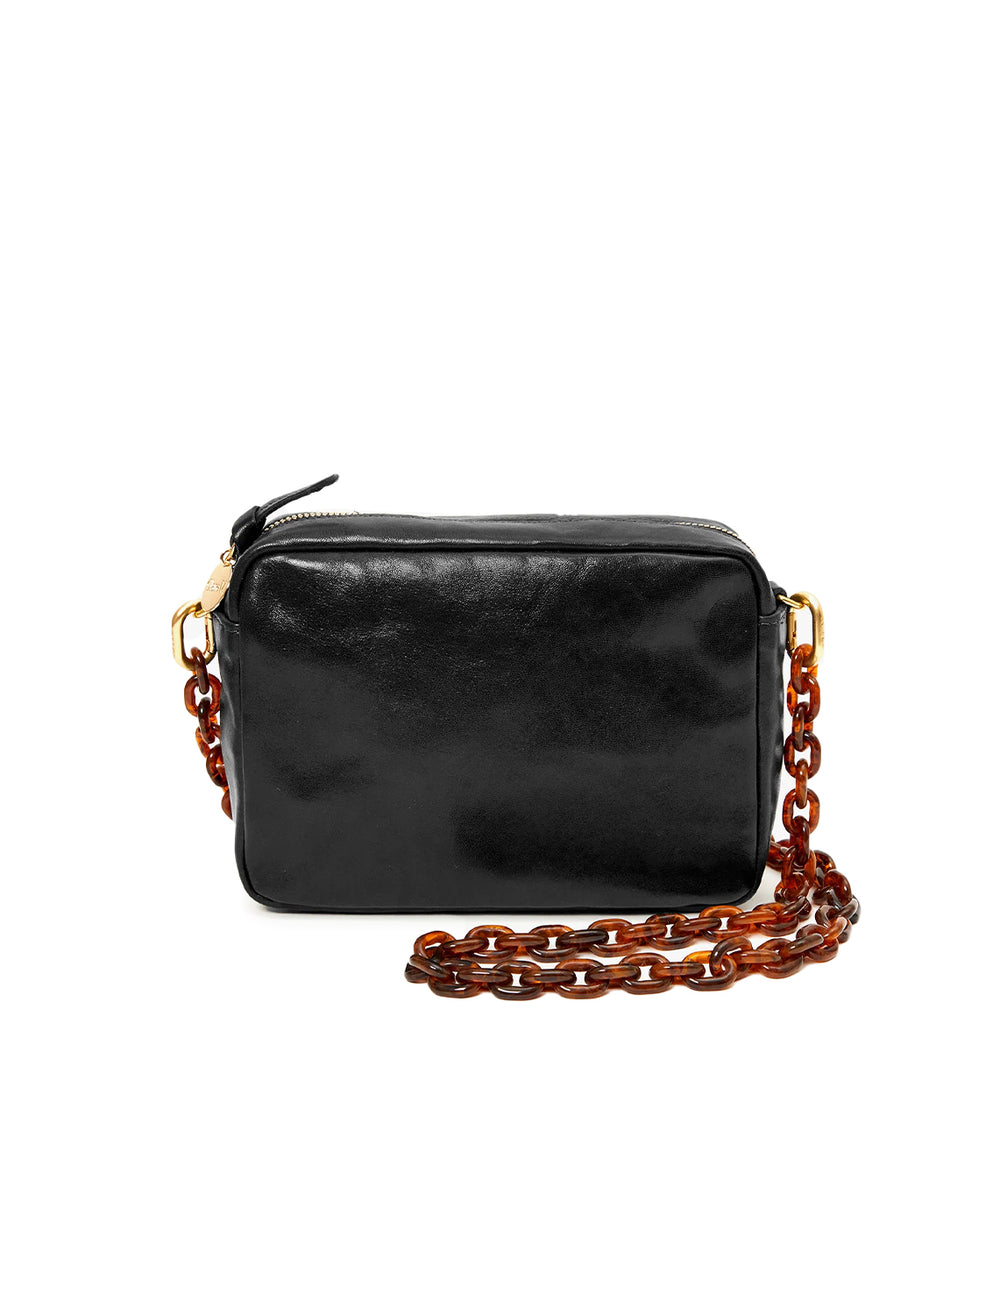 Clare V.'s mini resin link shoulder strap in tortoise shell attached to a bag.